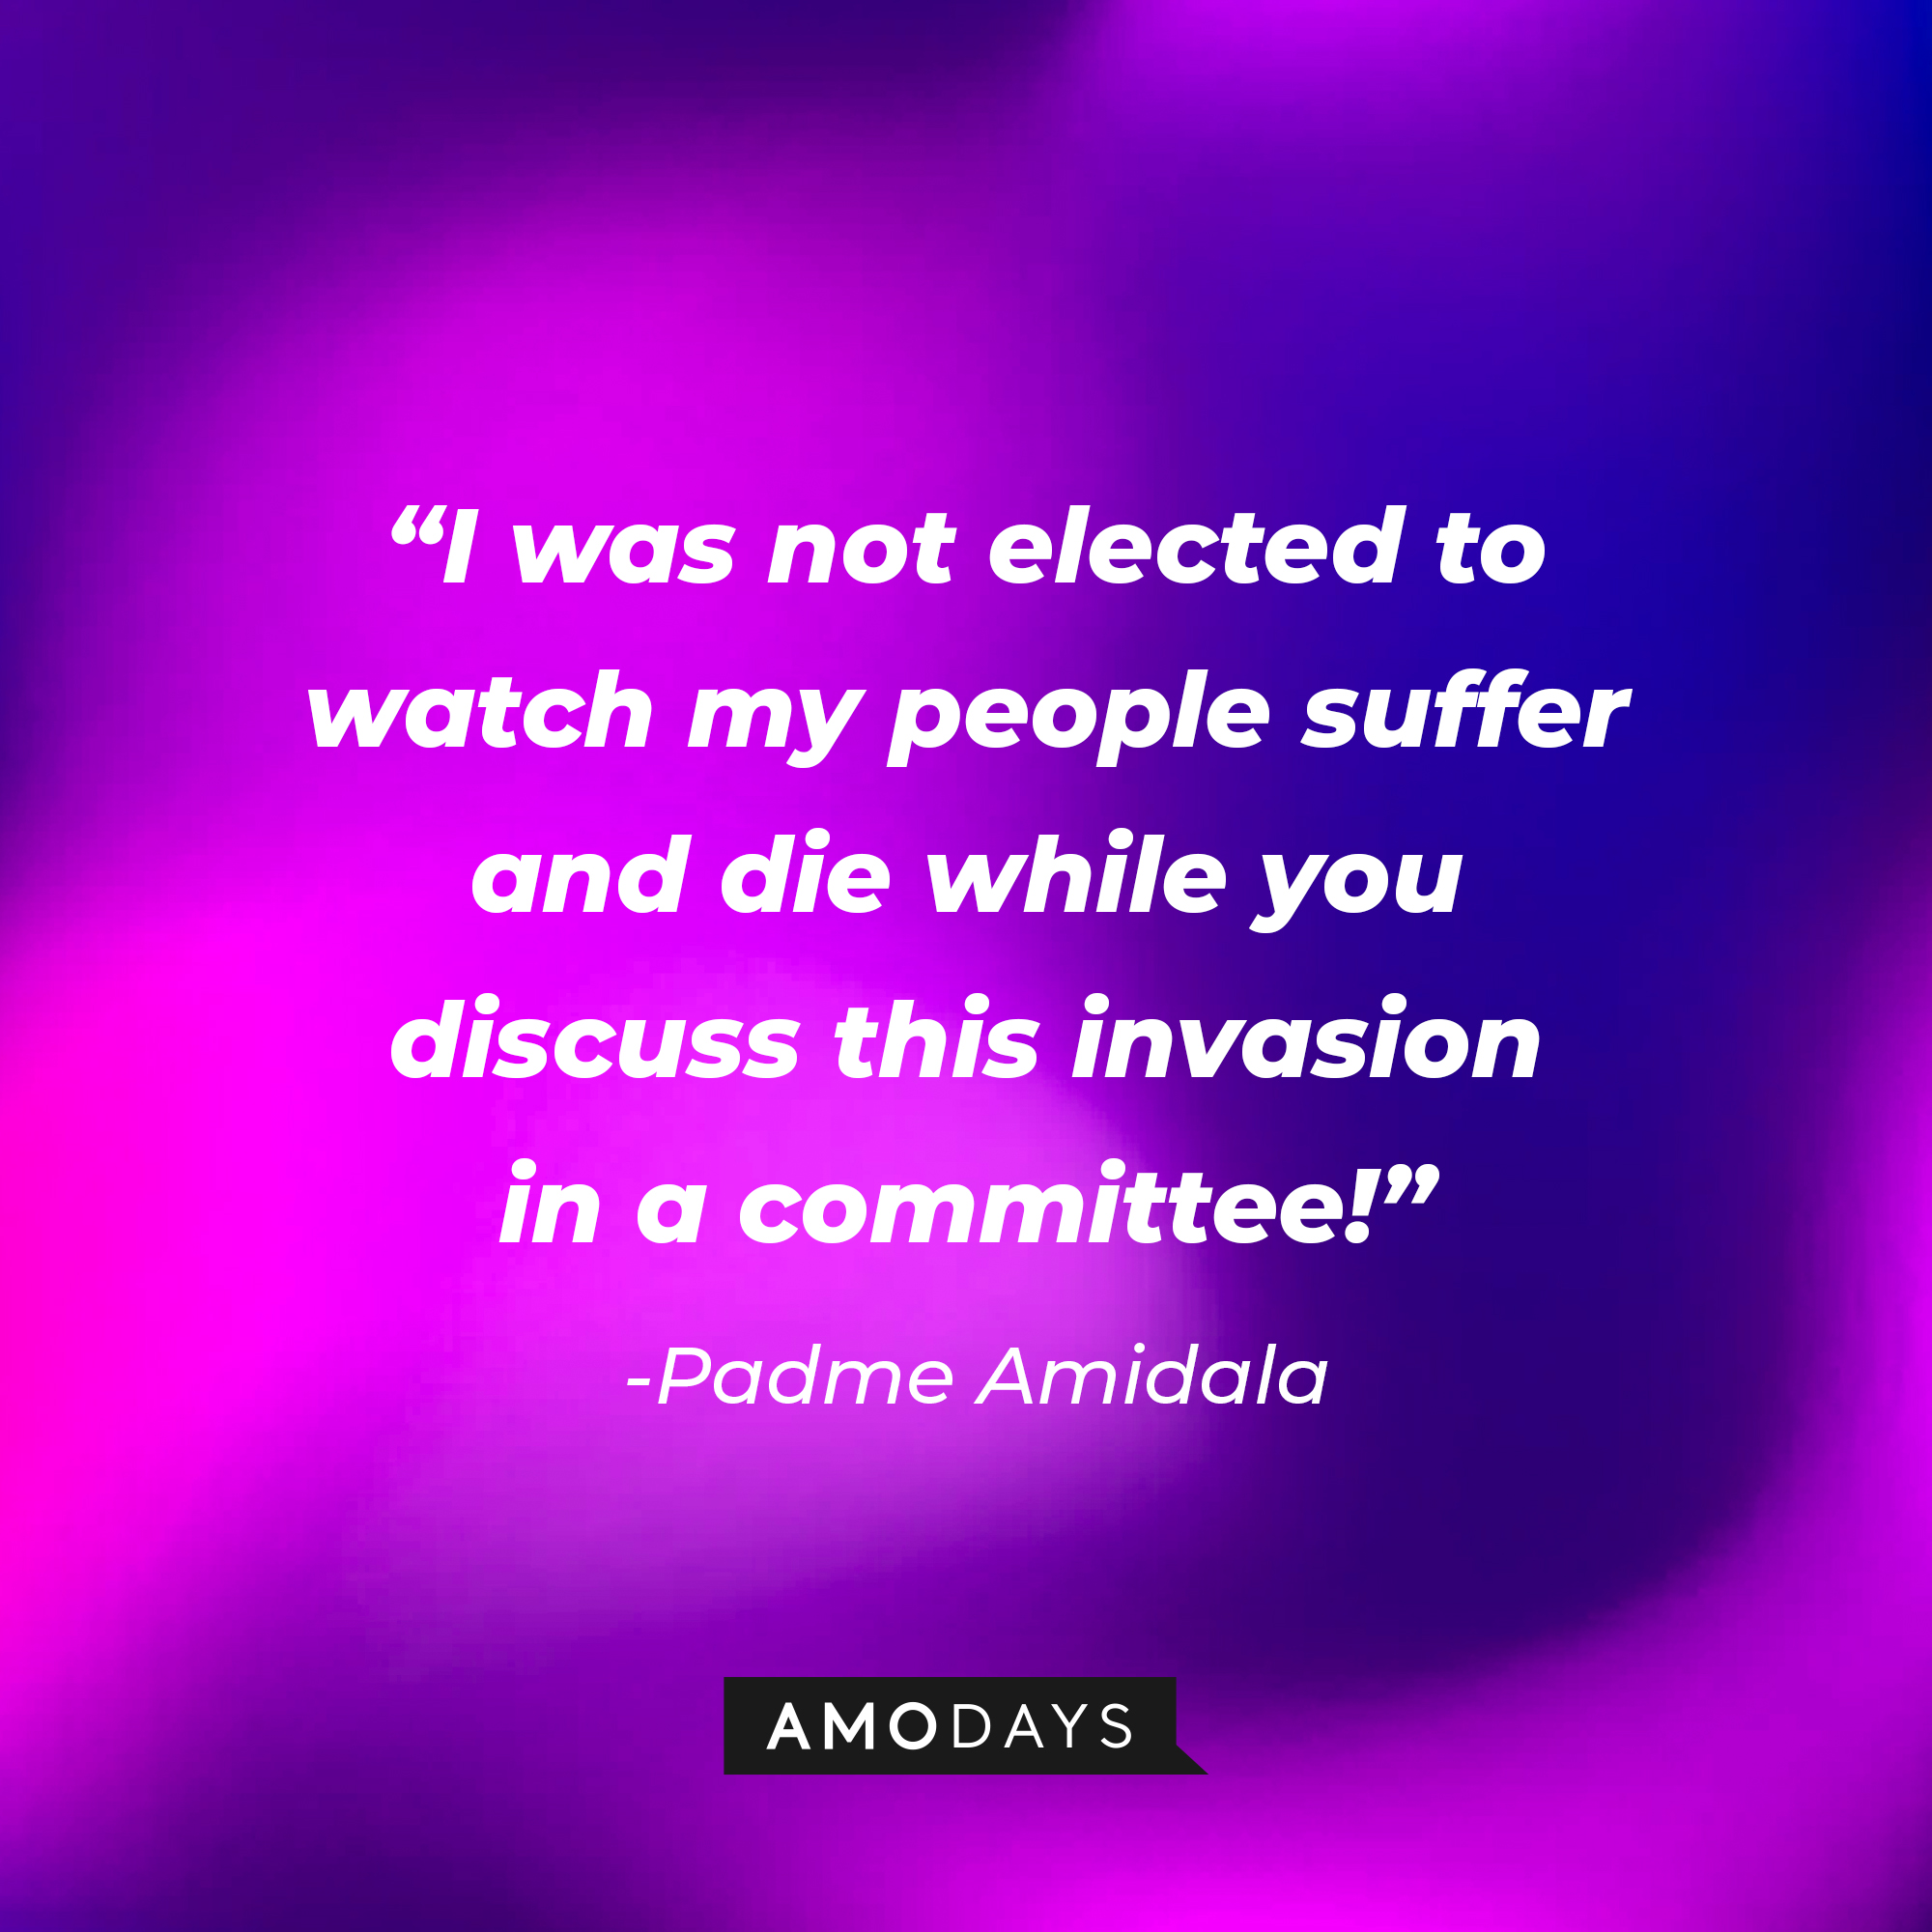 Padme Amidala's quote: "I was not elected to watch my people suffer and die while you discuss this invasion in a committee!" | Source: AmoDays